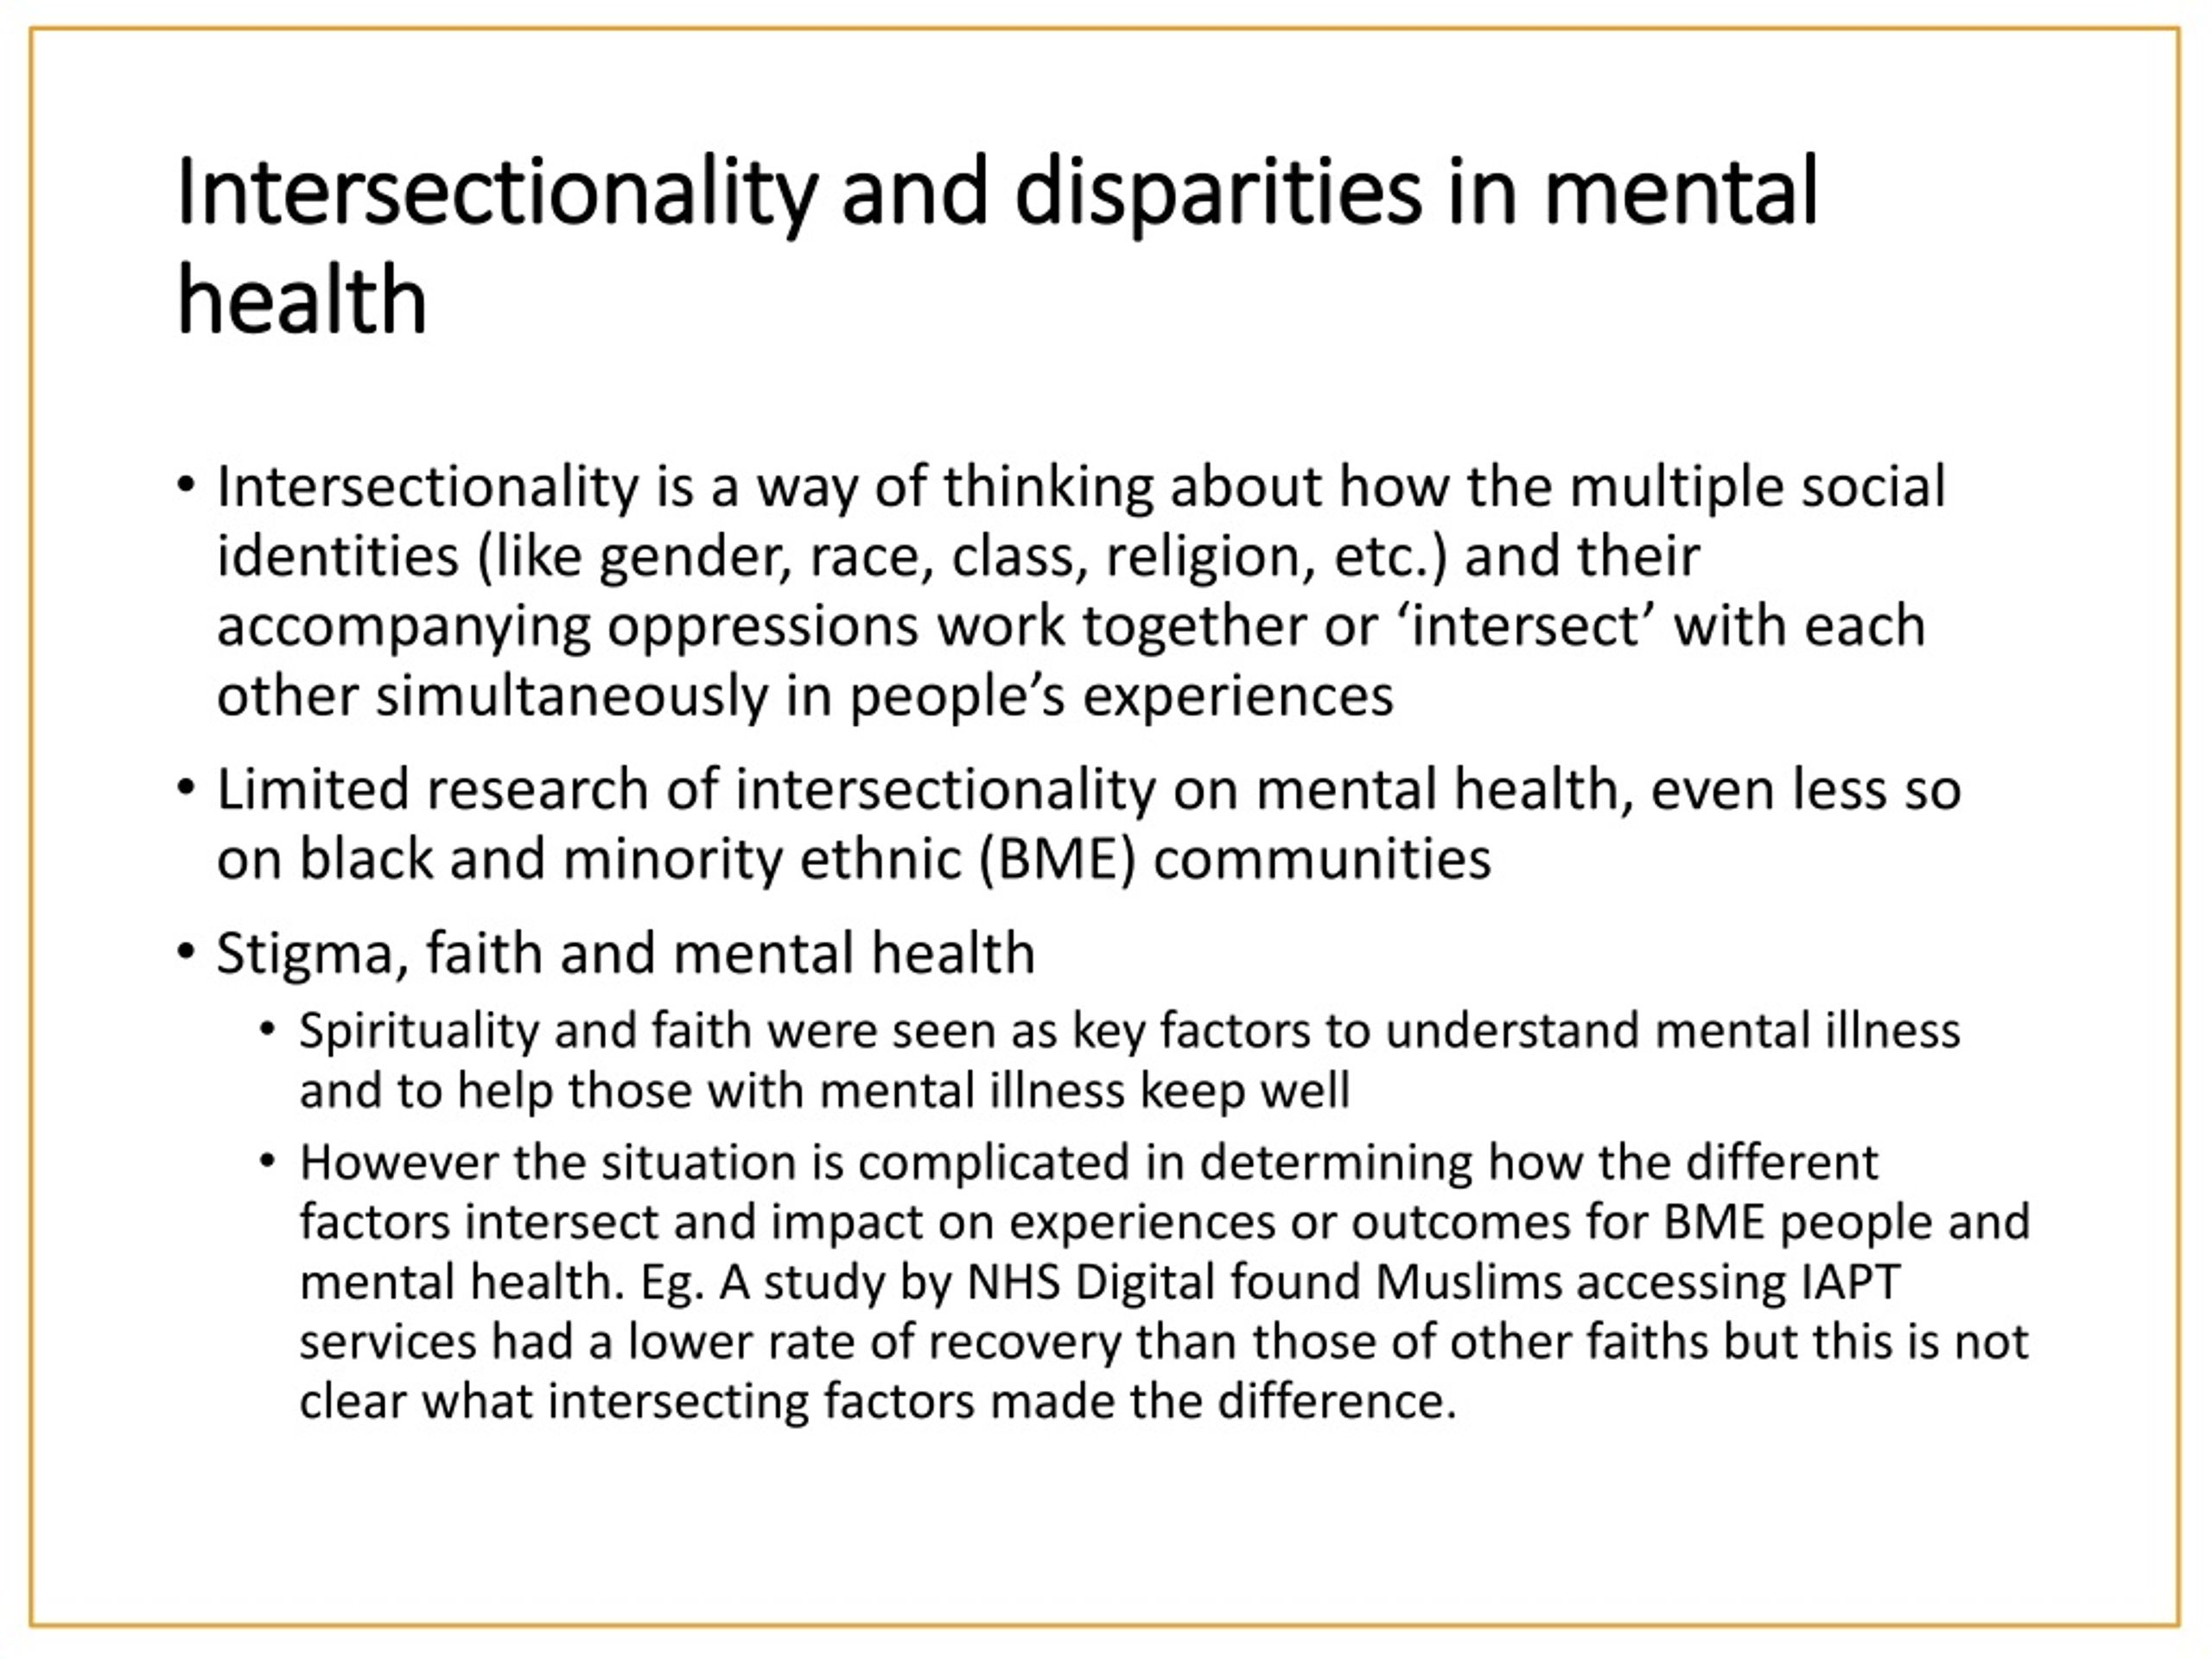 intersectionality and mental health a case study